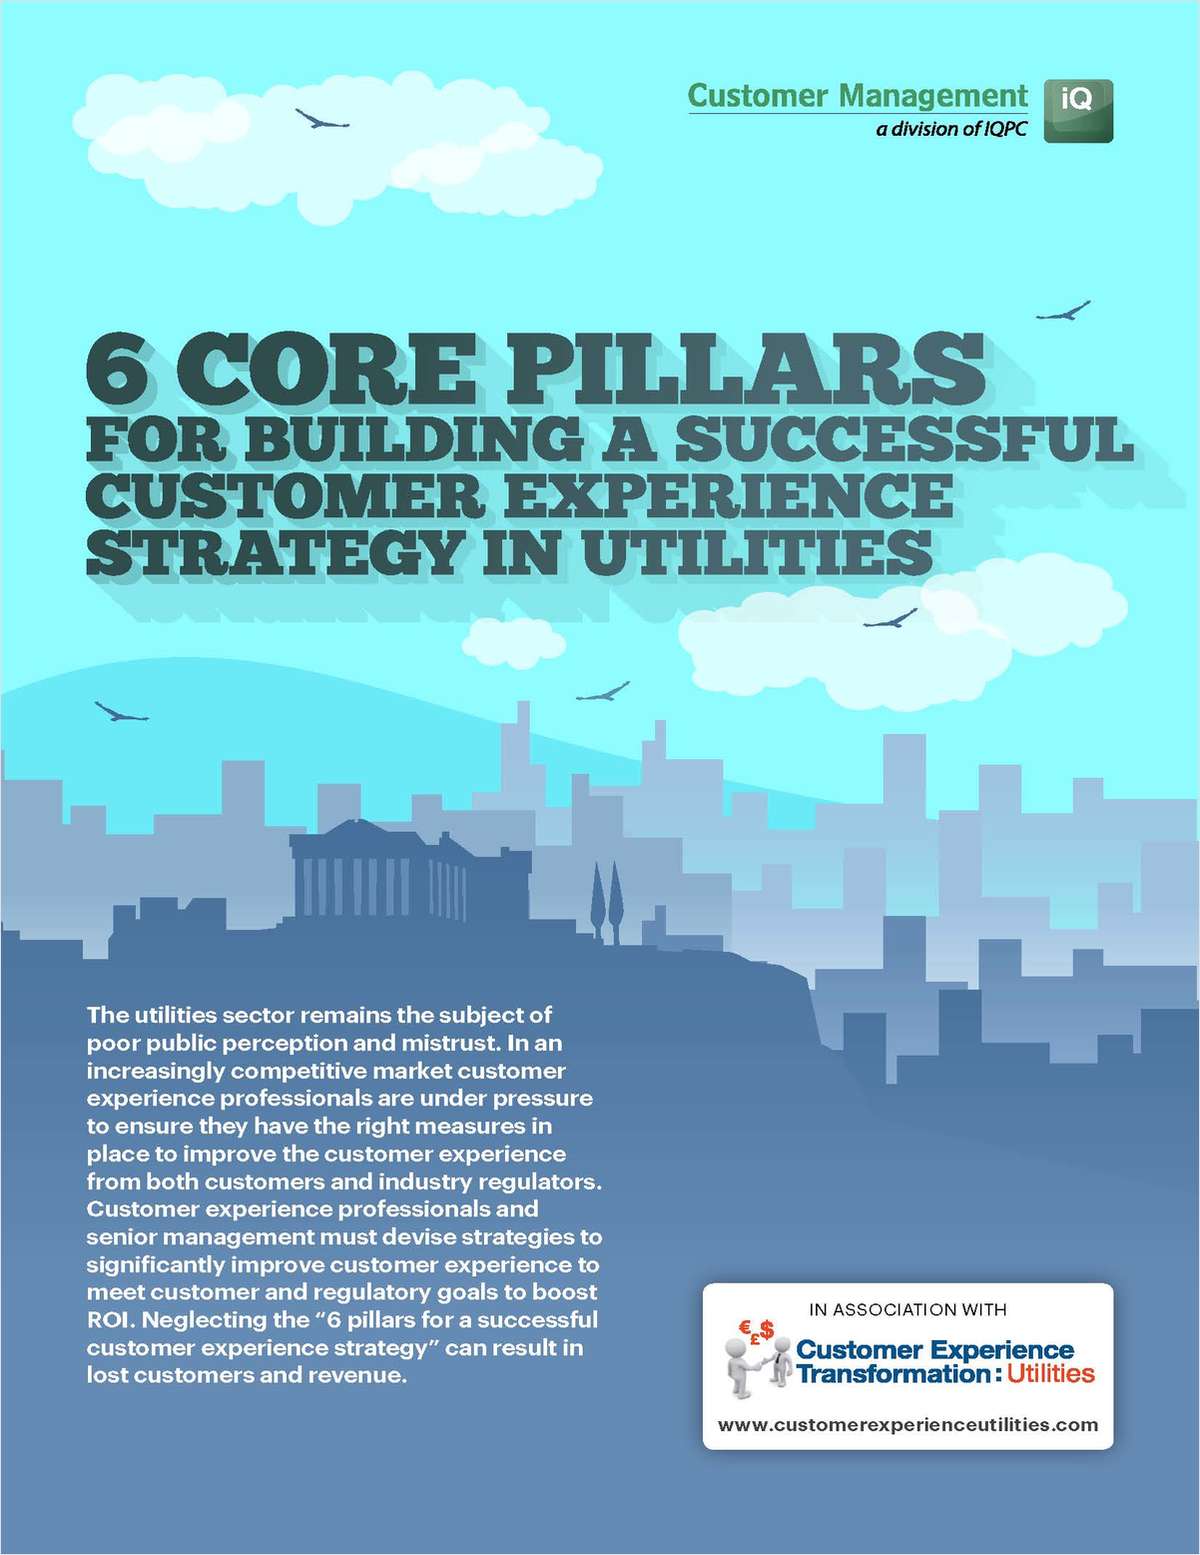 6 Core Pillars for building a successful customer experience strategy in utilities